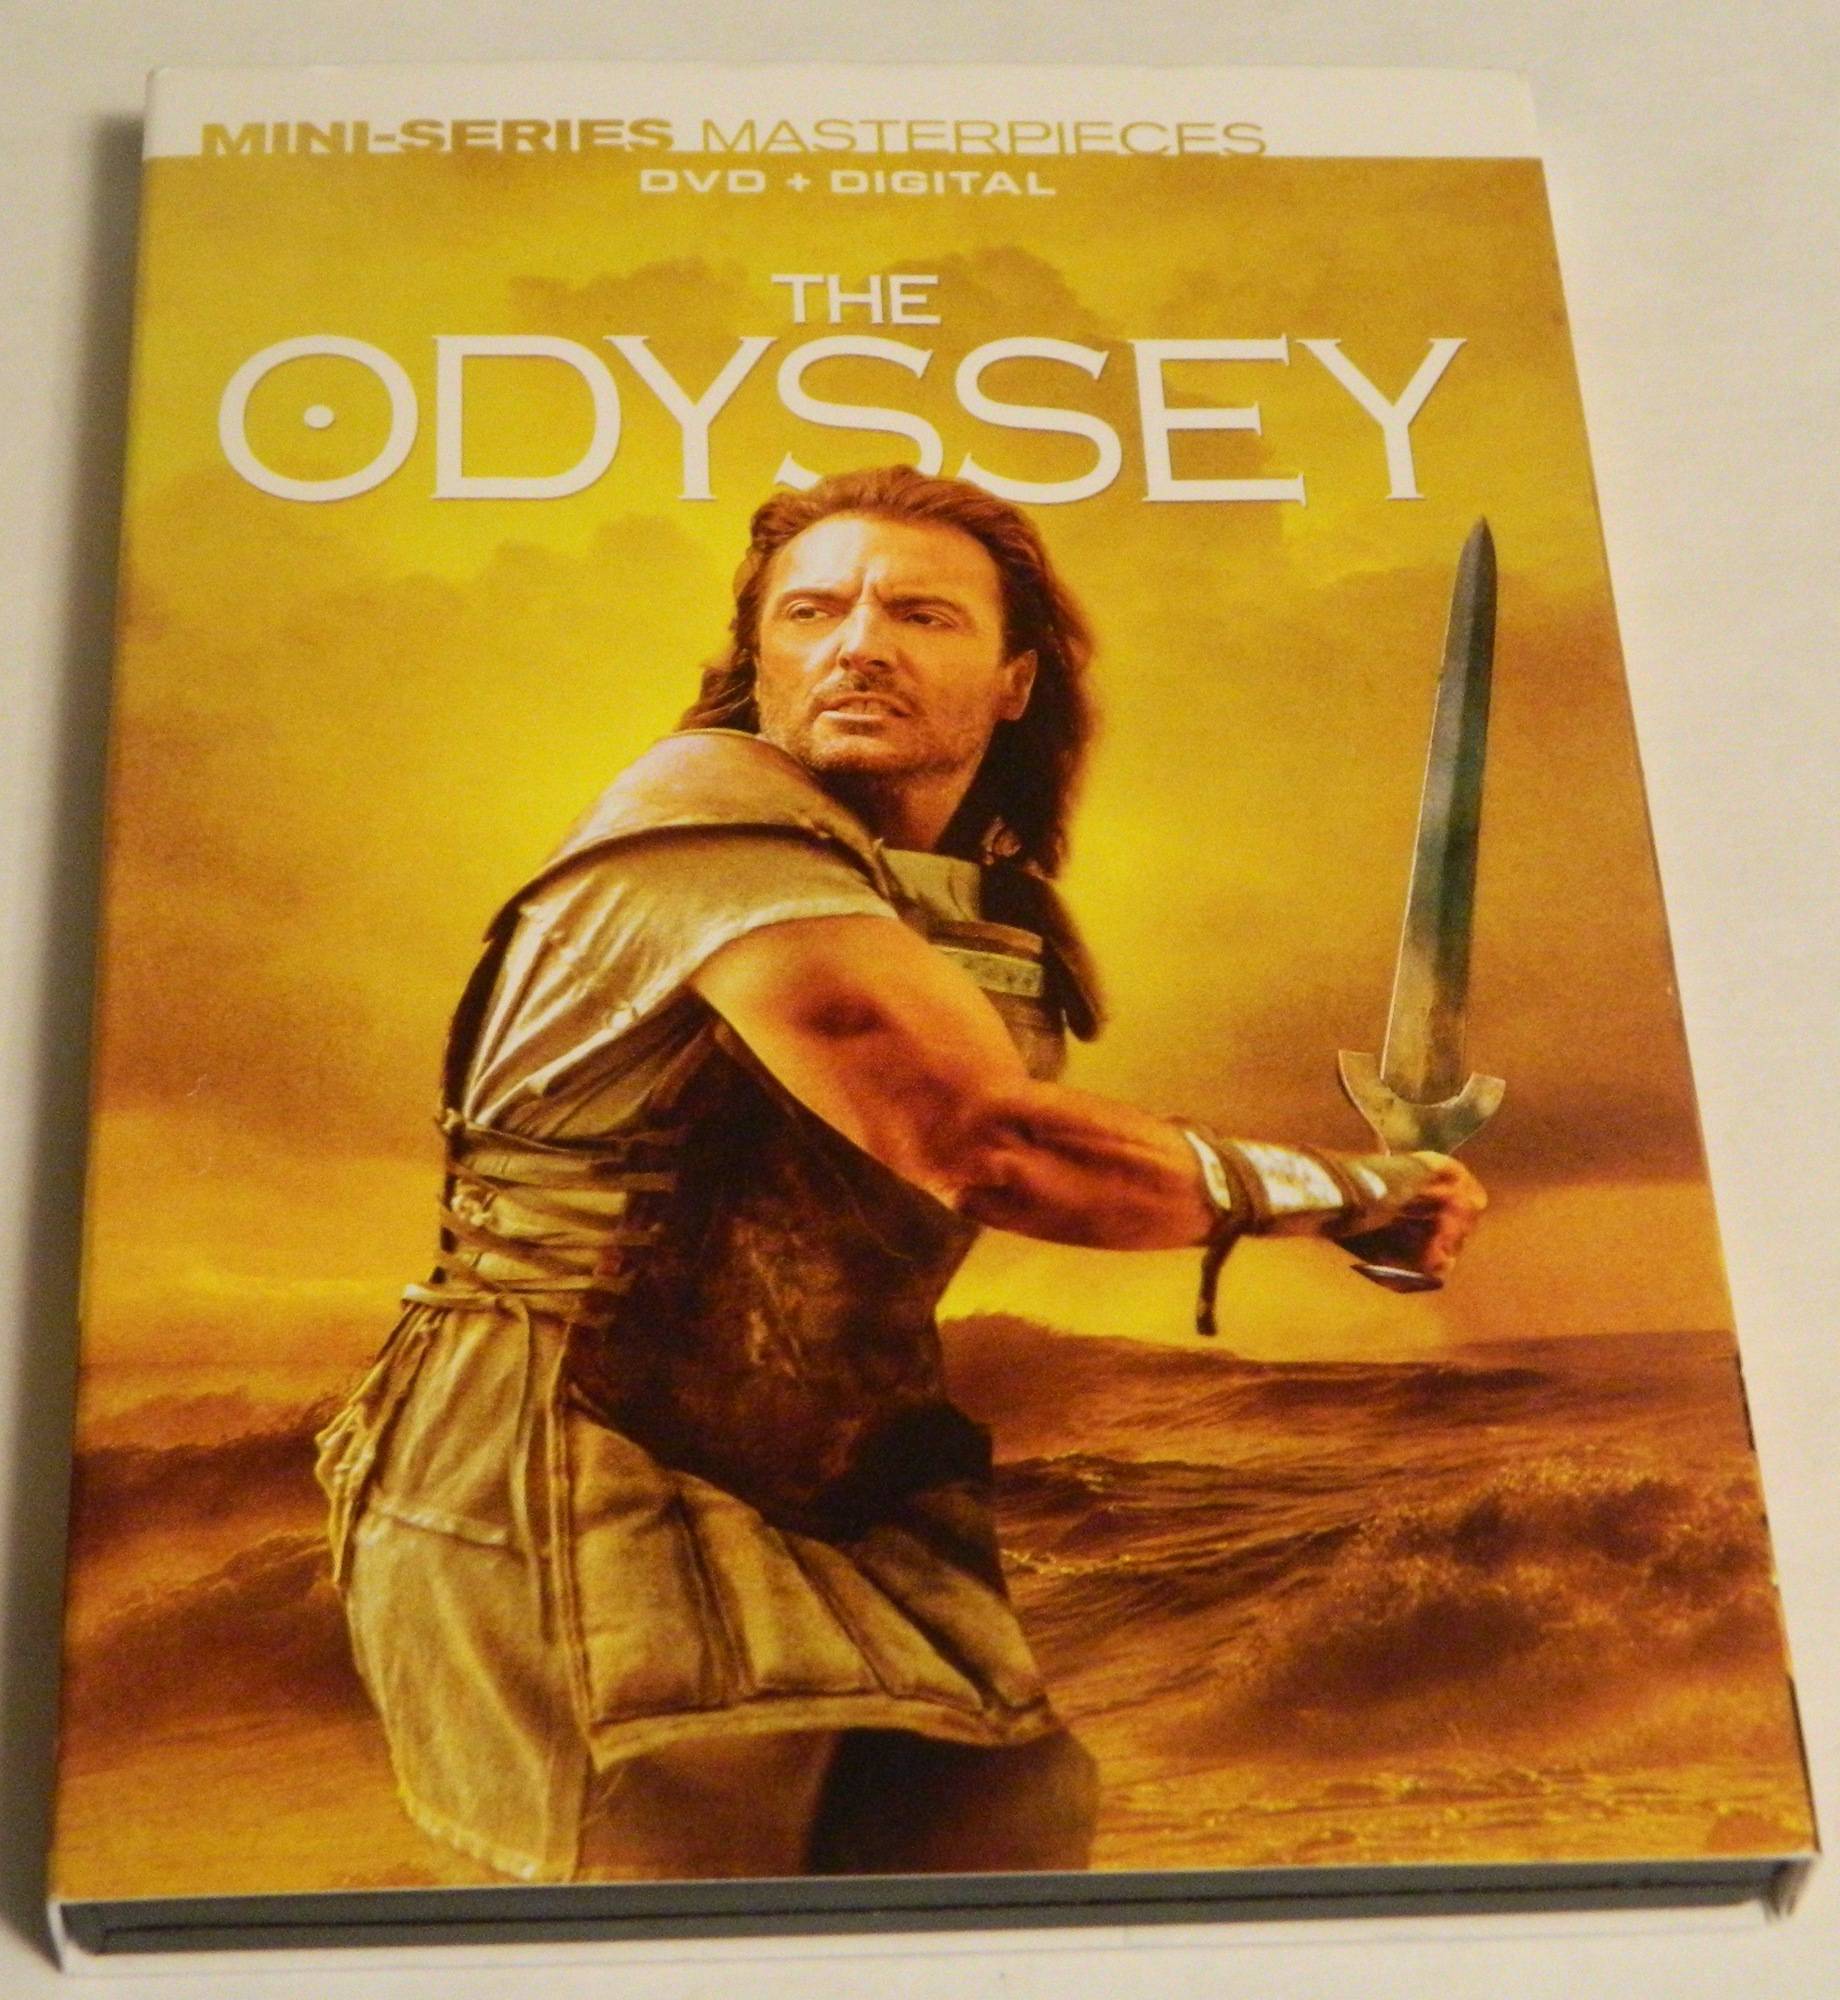 The Odyssey Mini-Series (1997) DVD Review